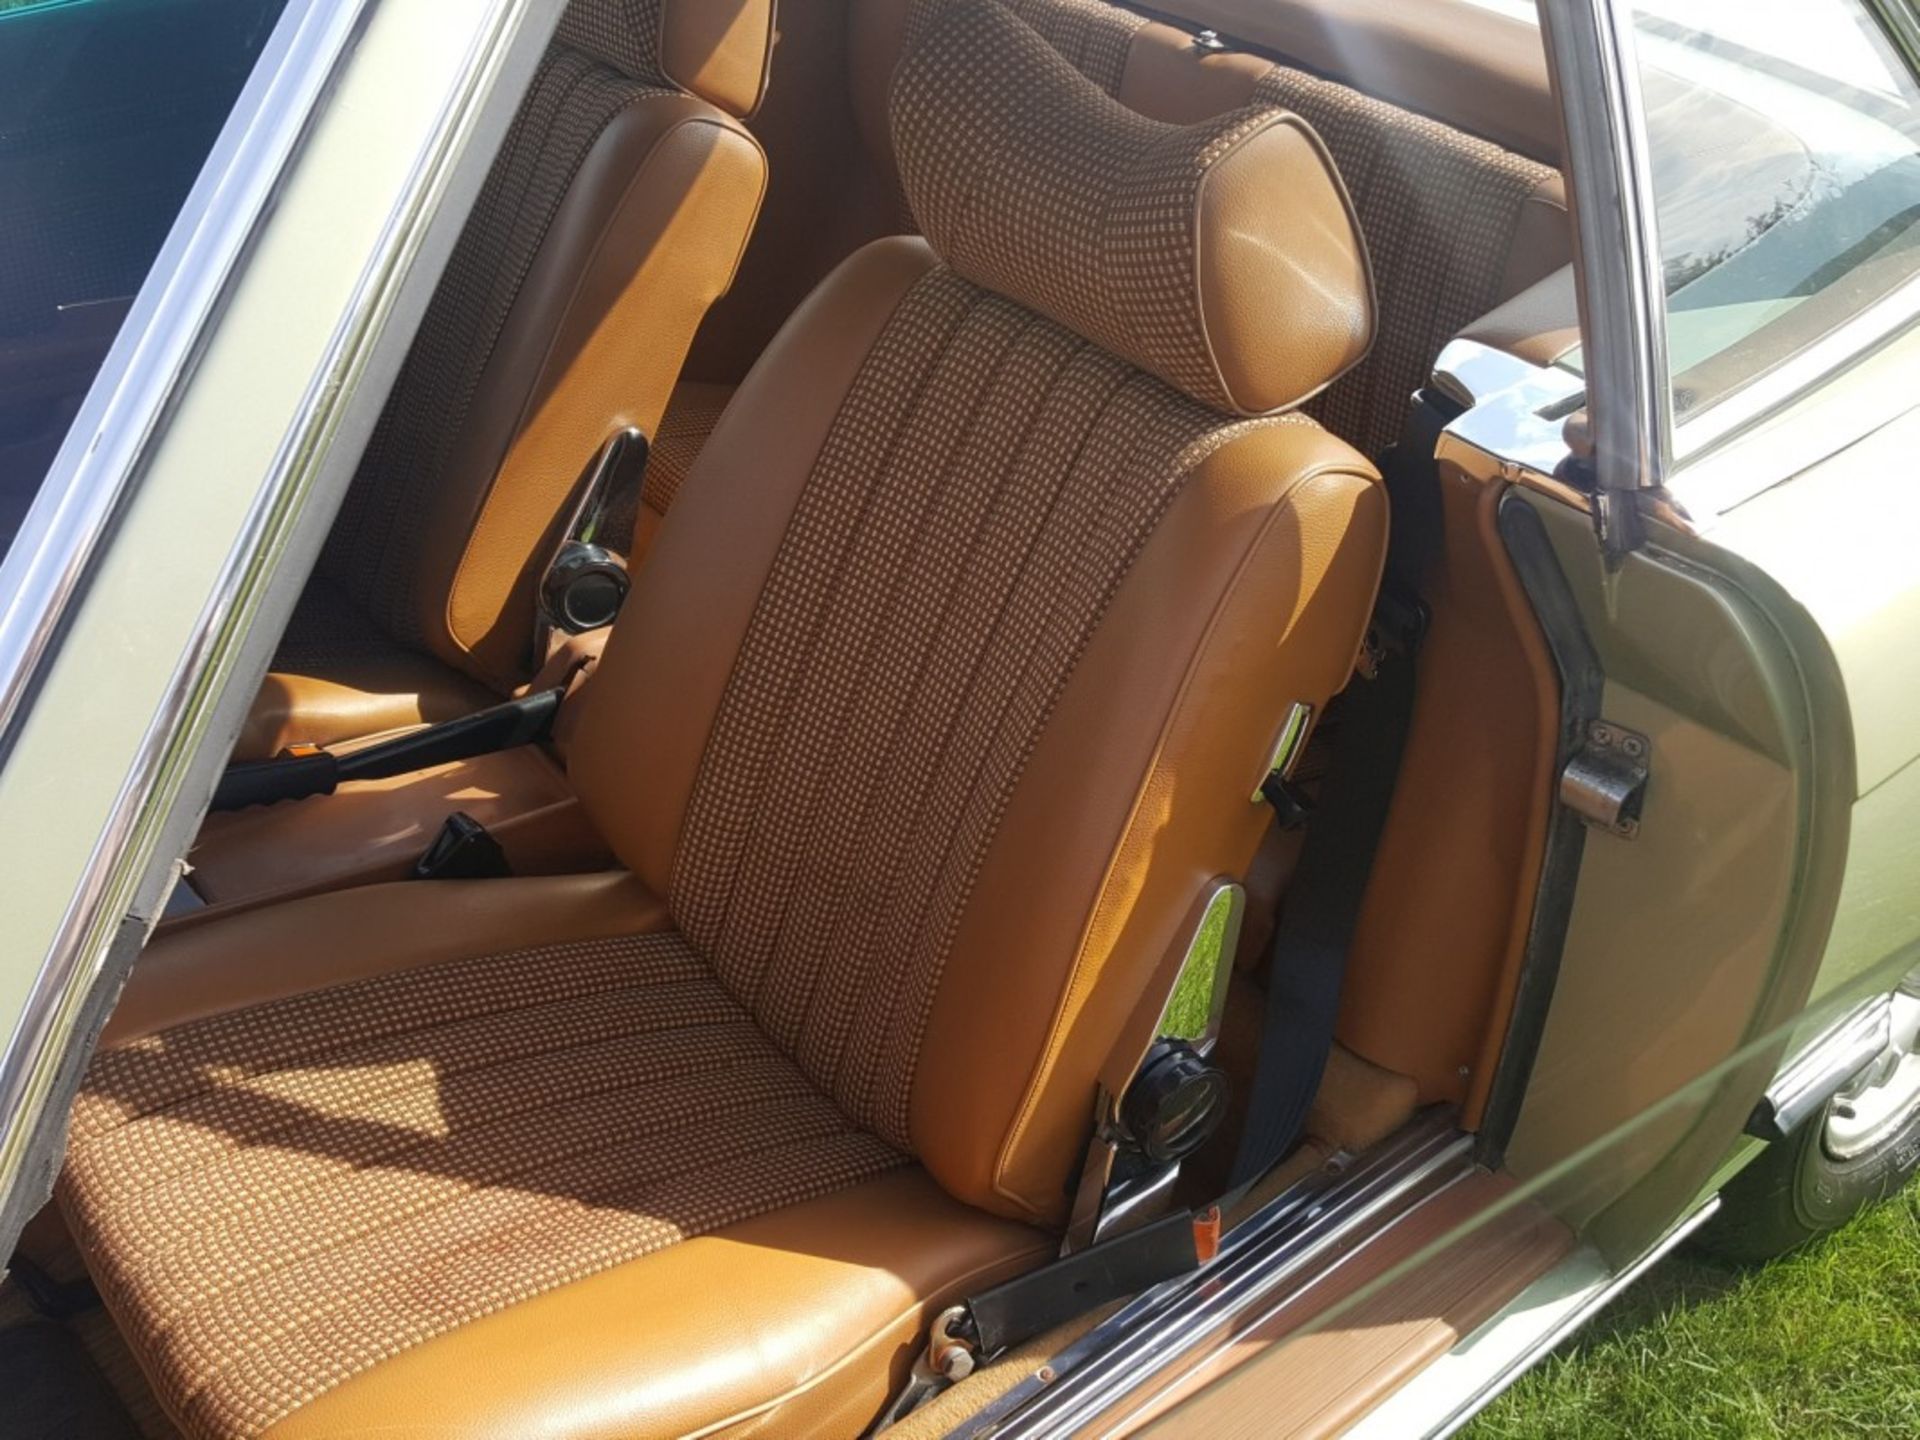 Mercedes 450SL Automatic 1978 - Image 12 of 12